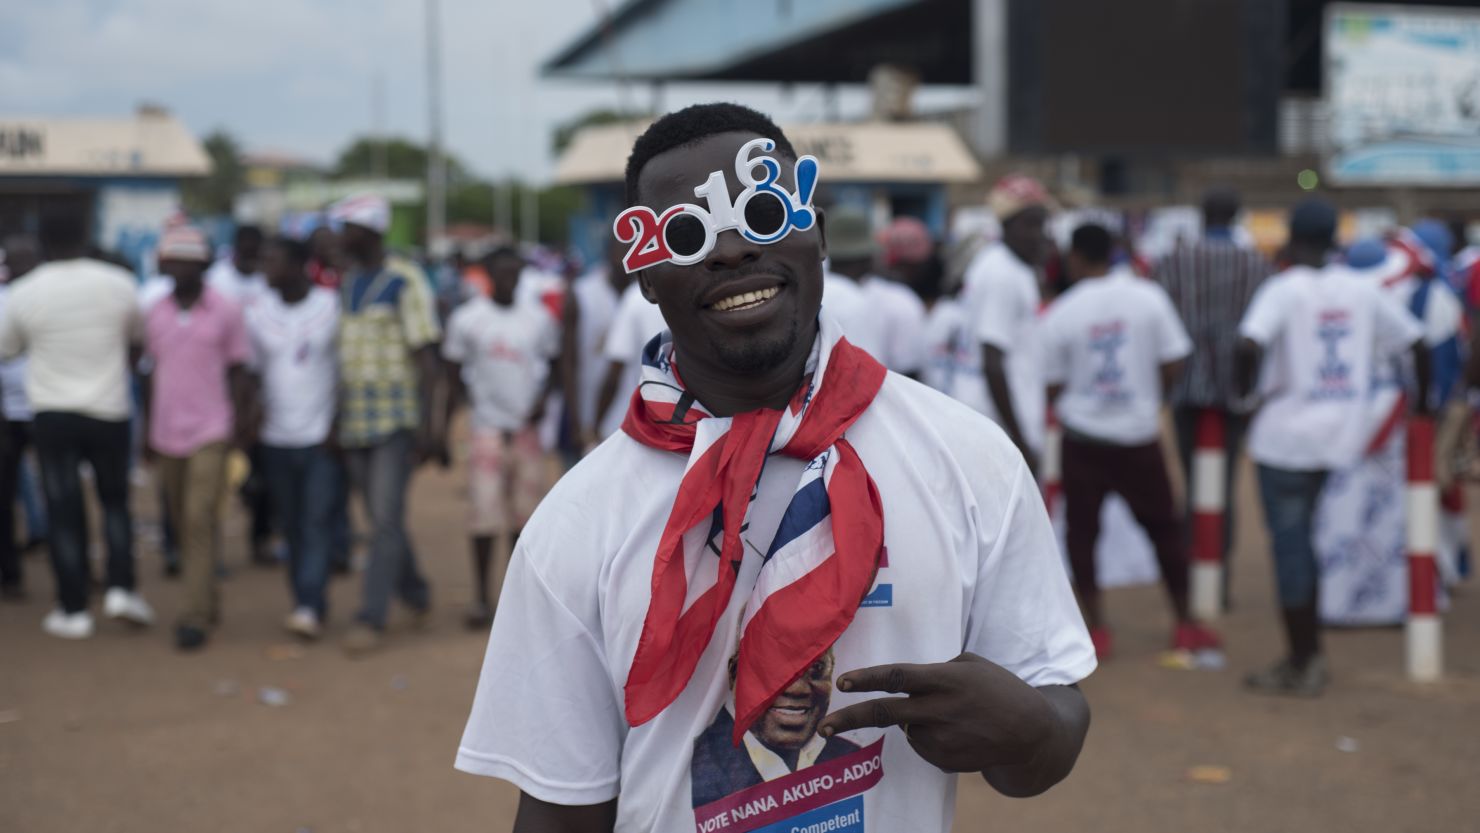 A supporter of Ghana's largest opposition party New Patriotic Party (NPP) gestures at the party manifesto launch in Accra in October 2016.
